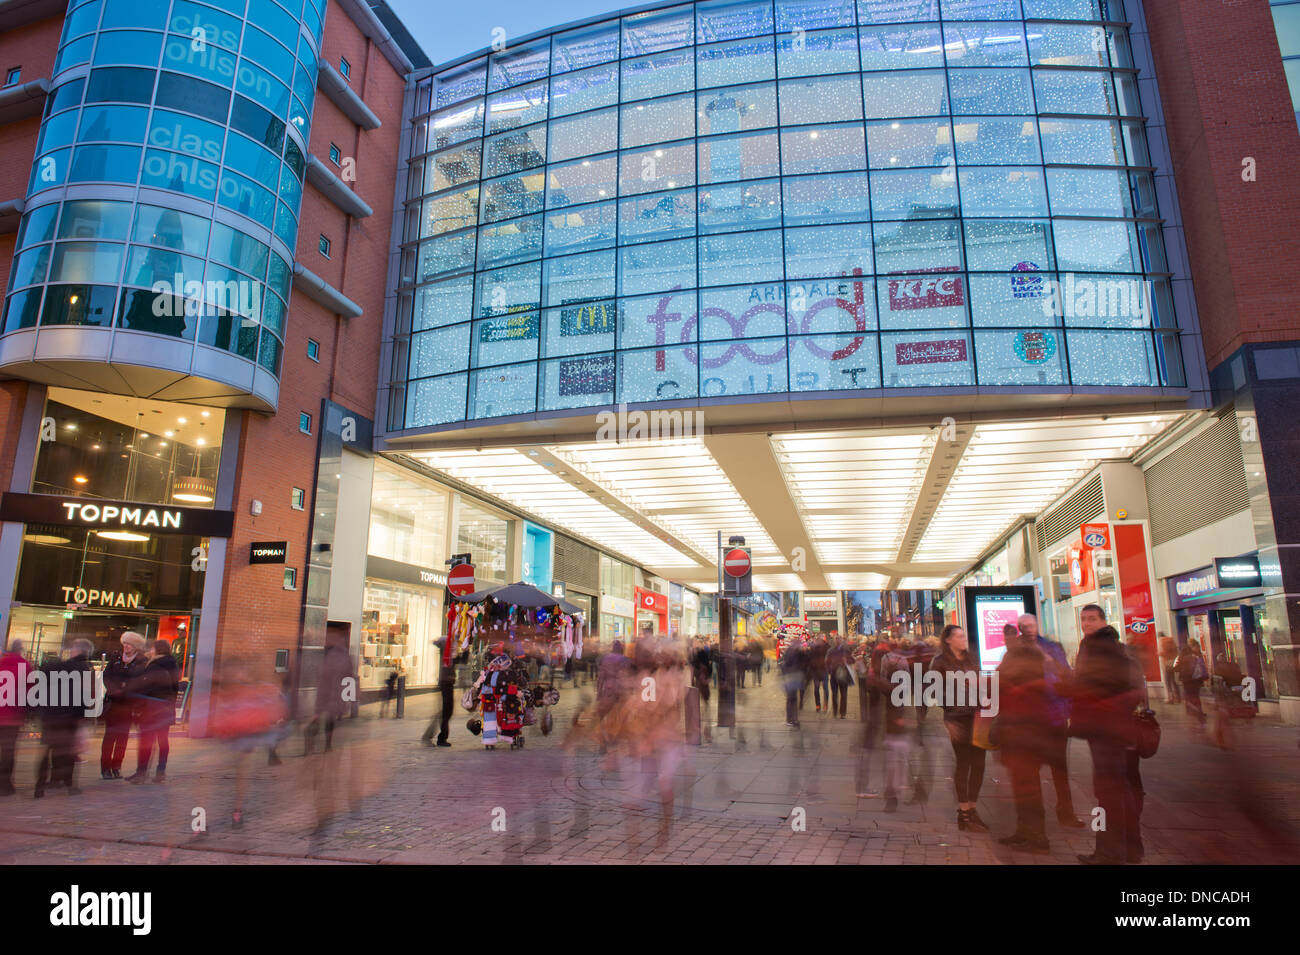 Manchester, UK. 22nd December, 2013. An external shot of Manchester Arndale shopping centre and Market Street during the Christmas lead up period. Market Street is one of the busiest commercial thoroughfares in the city. Credit:  Russell Hart/Alamy Live News Stock Photo